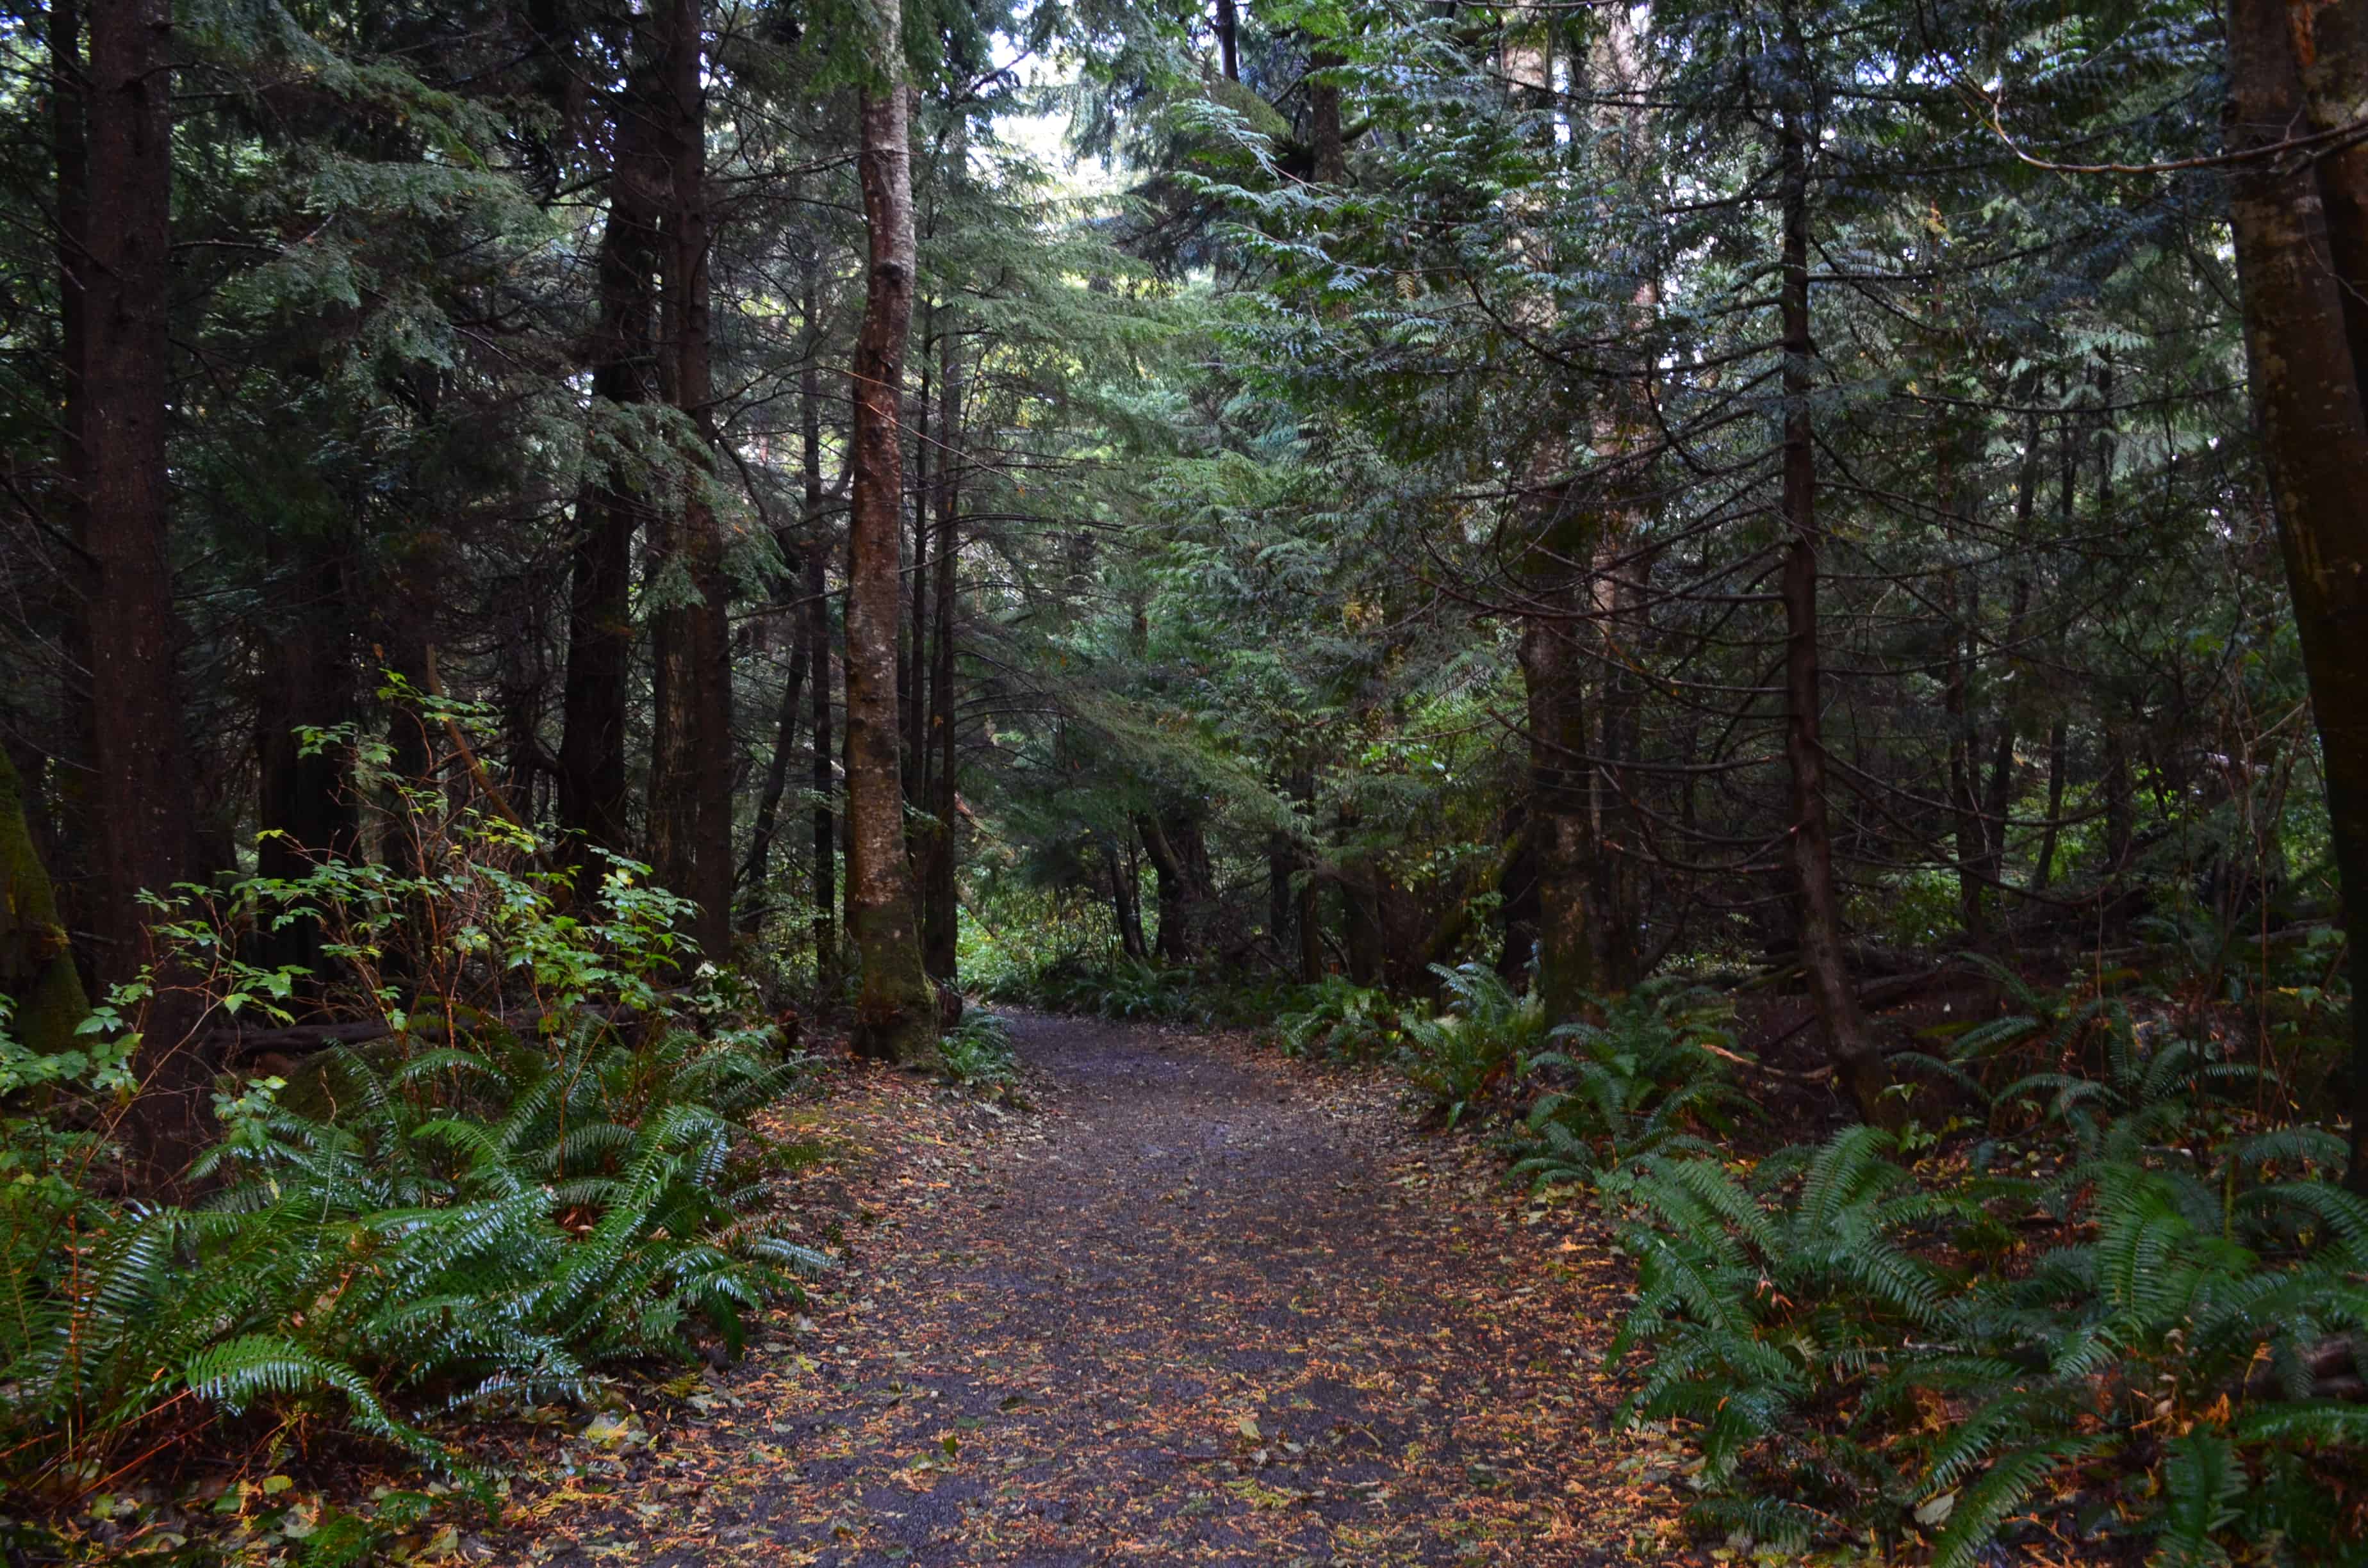 Cape Flattery Trail on the Makah Reservation in Washington